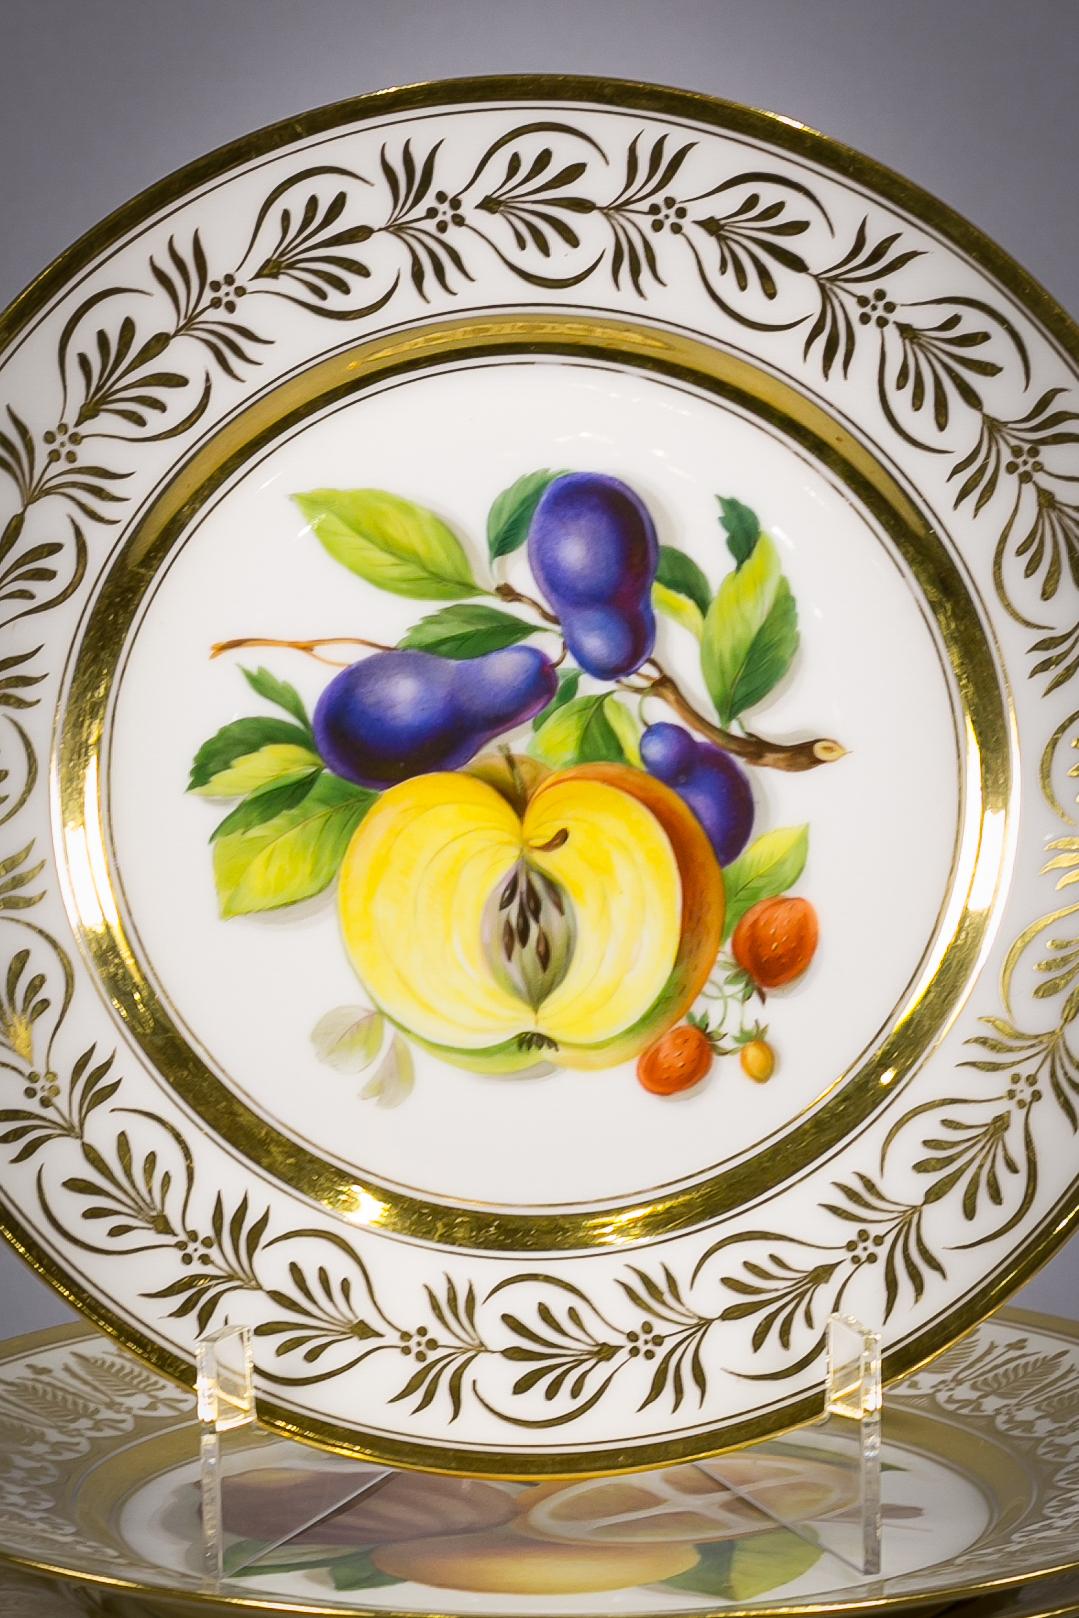 Pomological plates. Each painted with different arrangements of fruits with harlequin borders in gilt, circa 1900.